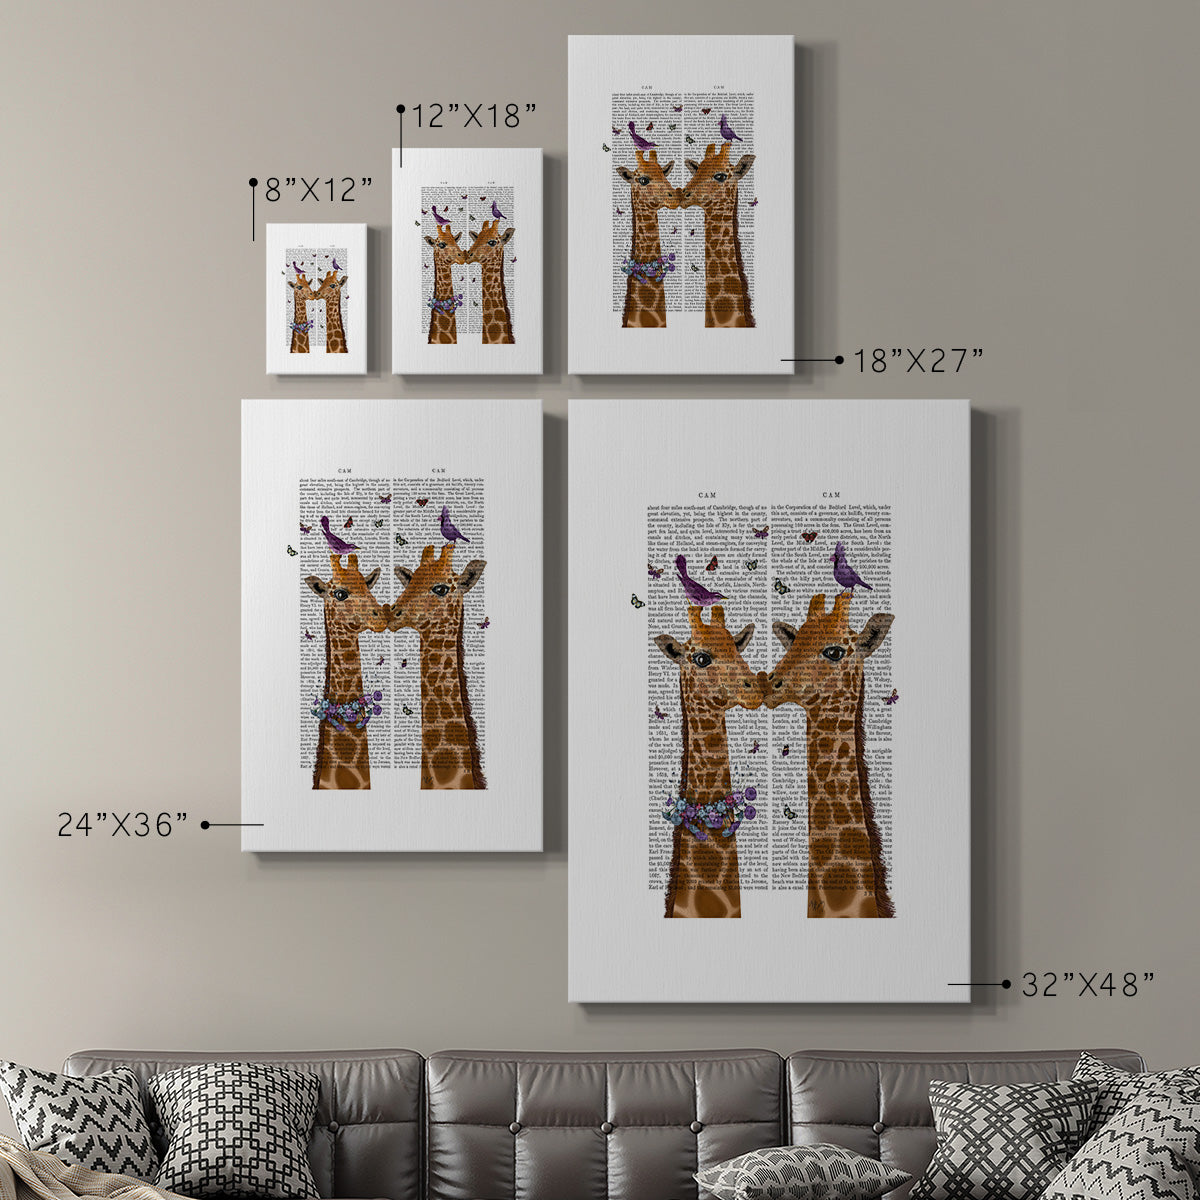 Kissing Giraffes with Birds Premium Gallery Wrapped Canvas - Ready to Hang